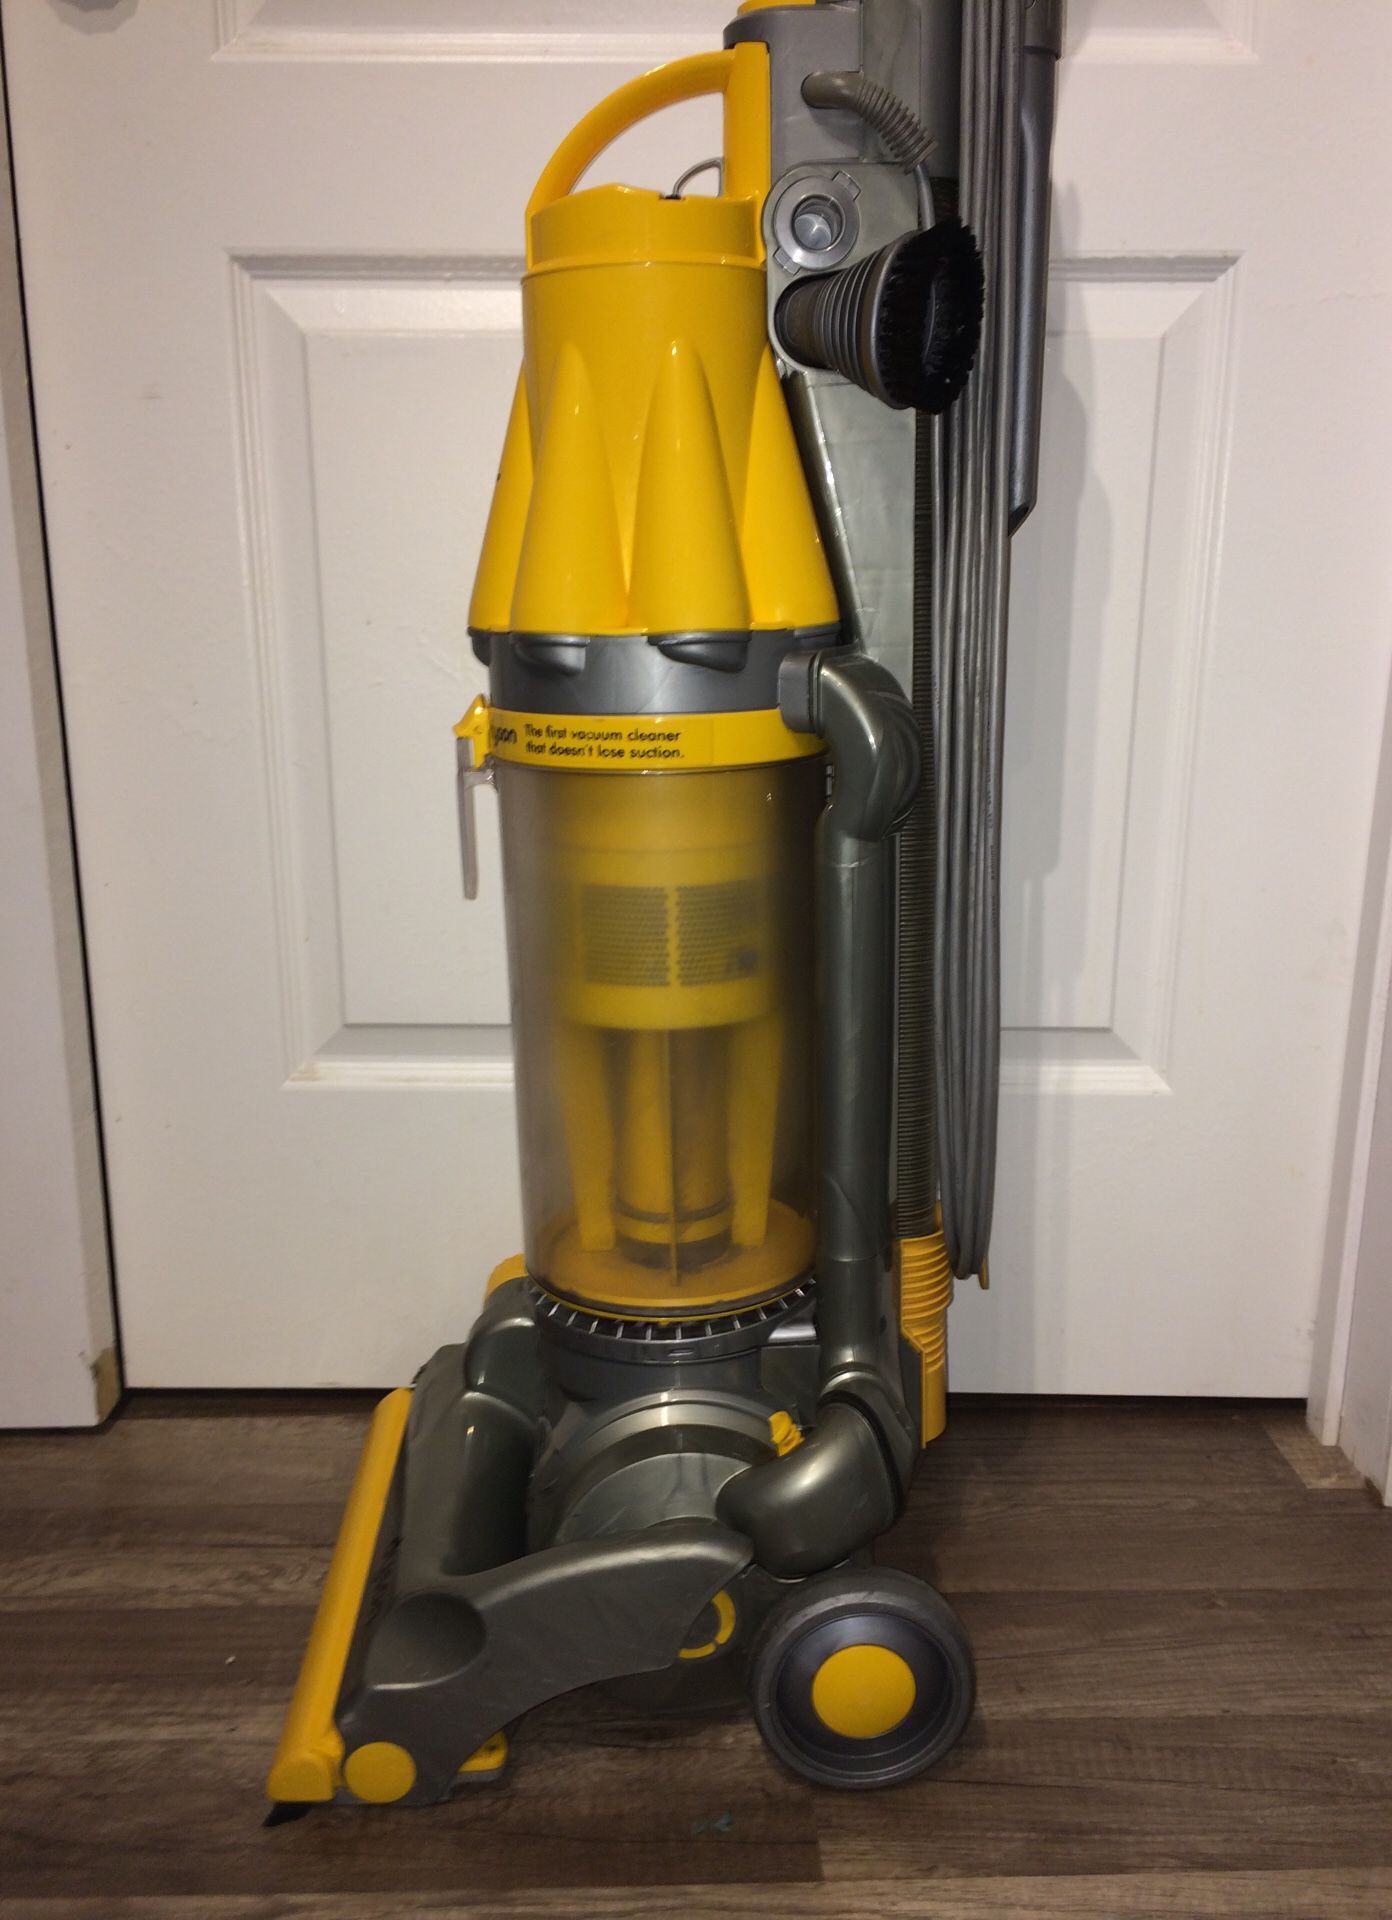 Dyson DC07 Root Cyclone